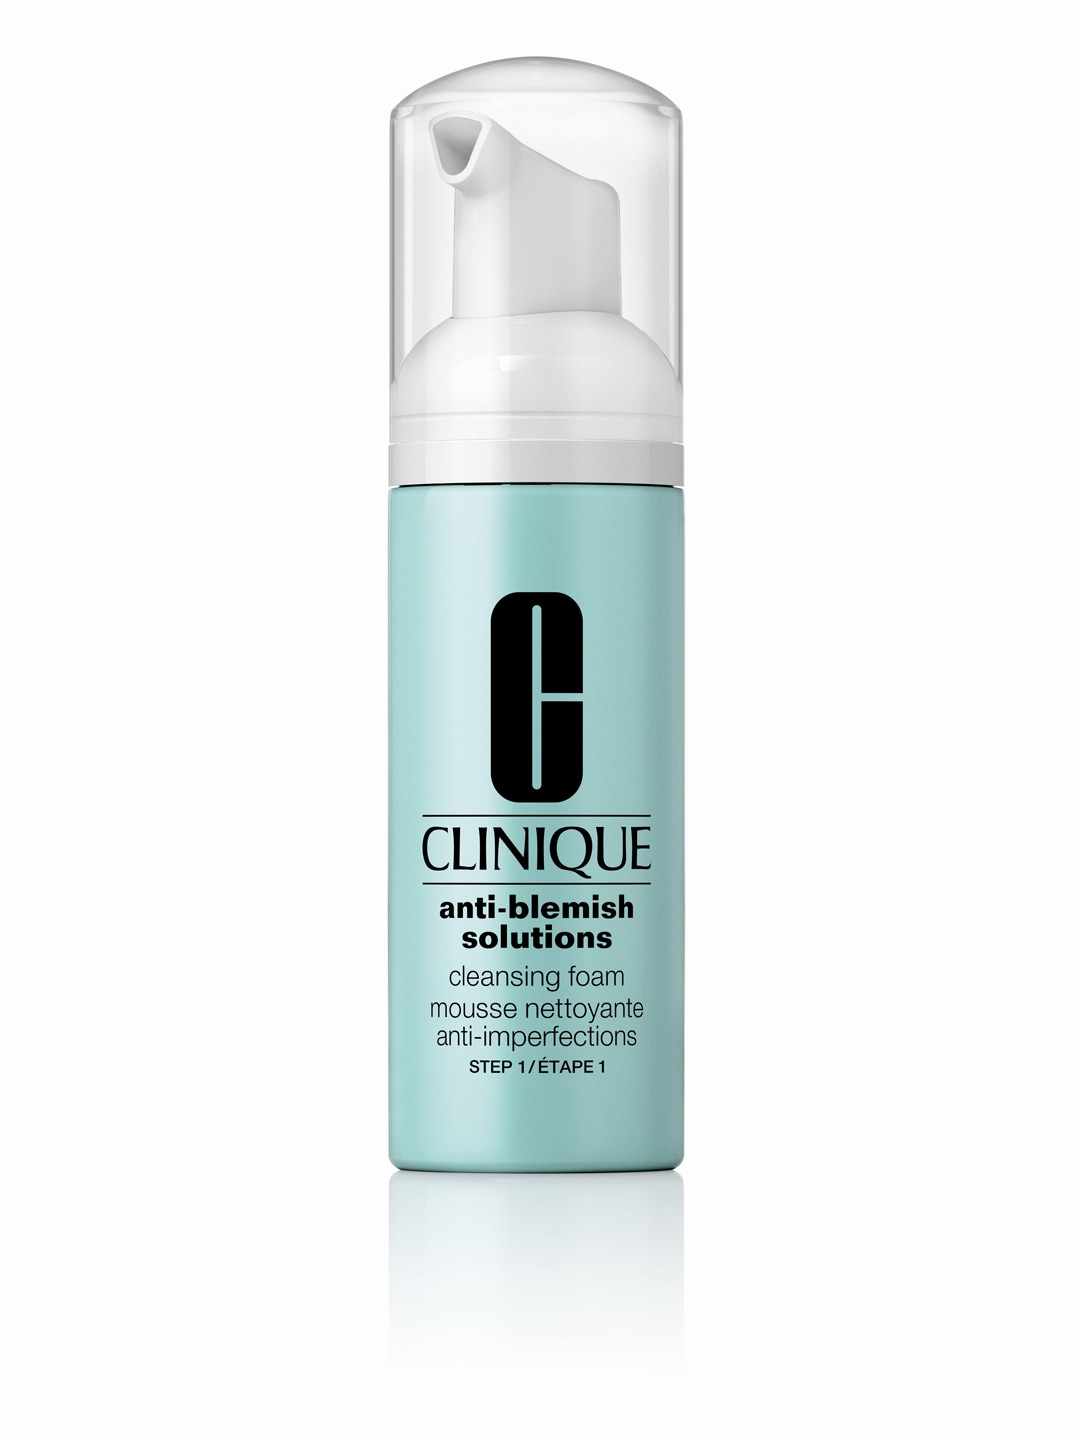 Clinique Anti-Blemish Solutions Cleansing Foam 50ml Price in India